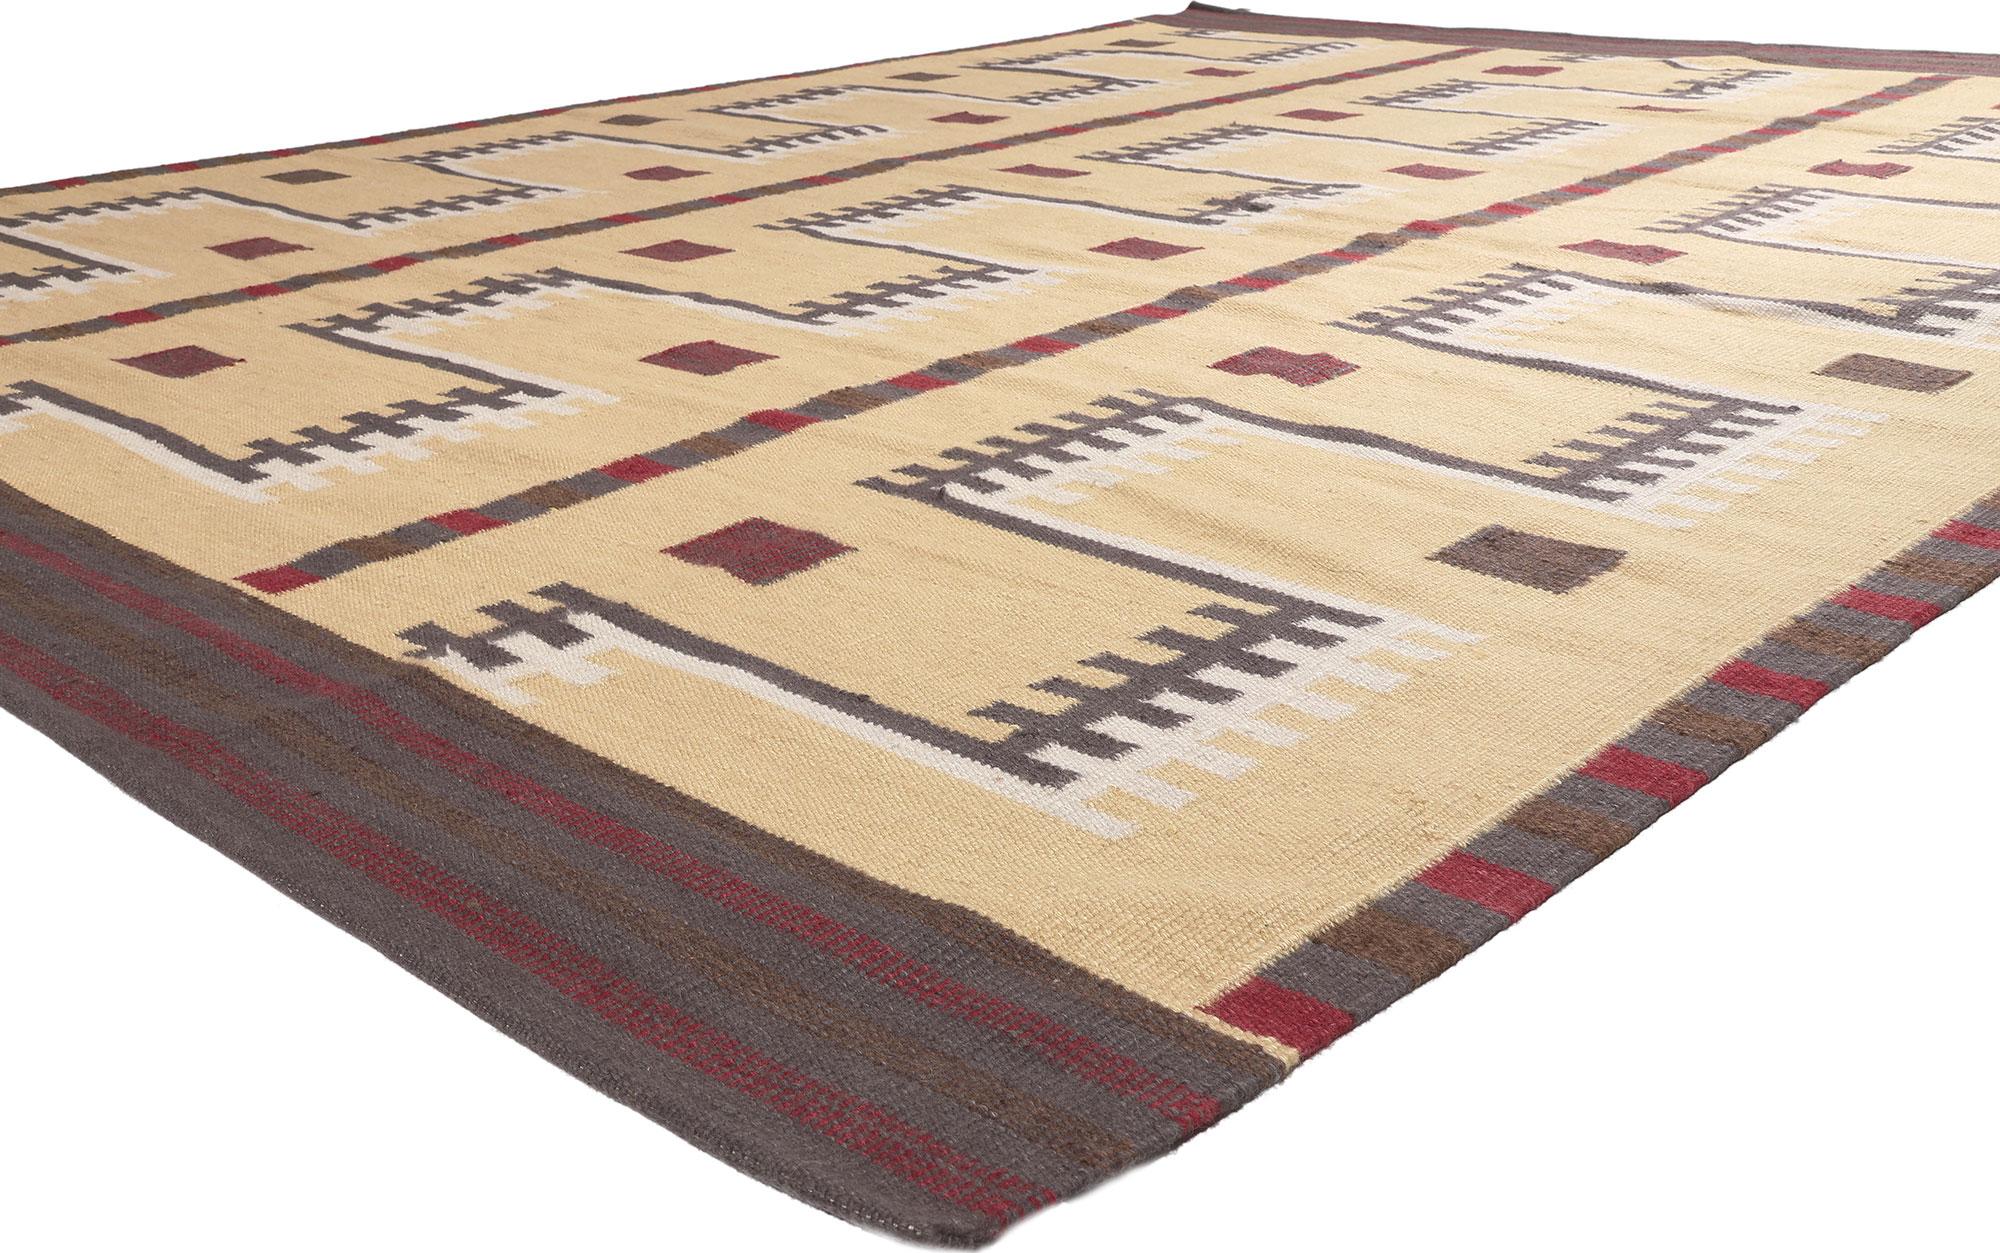 30962 New Swedish Inspired Kilim Rug, 10'02 x 12'10. This handwoven Swedish-style kilim rug showcases the dynamic and adventurous facet of Scandinavian design, captivating viewers with its bold geometric patterns and vibrant blue hues. The interplay